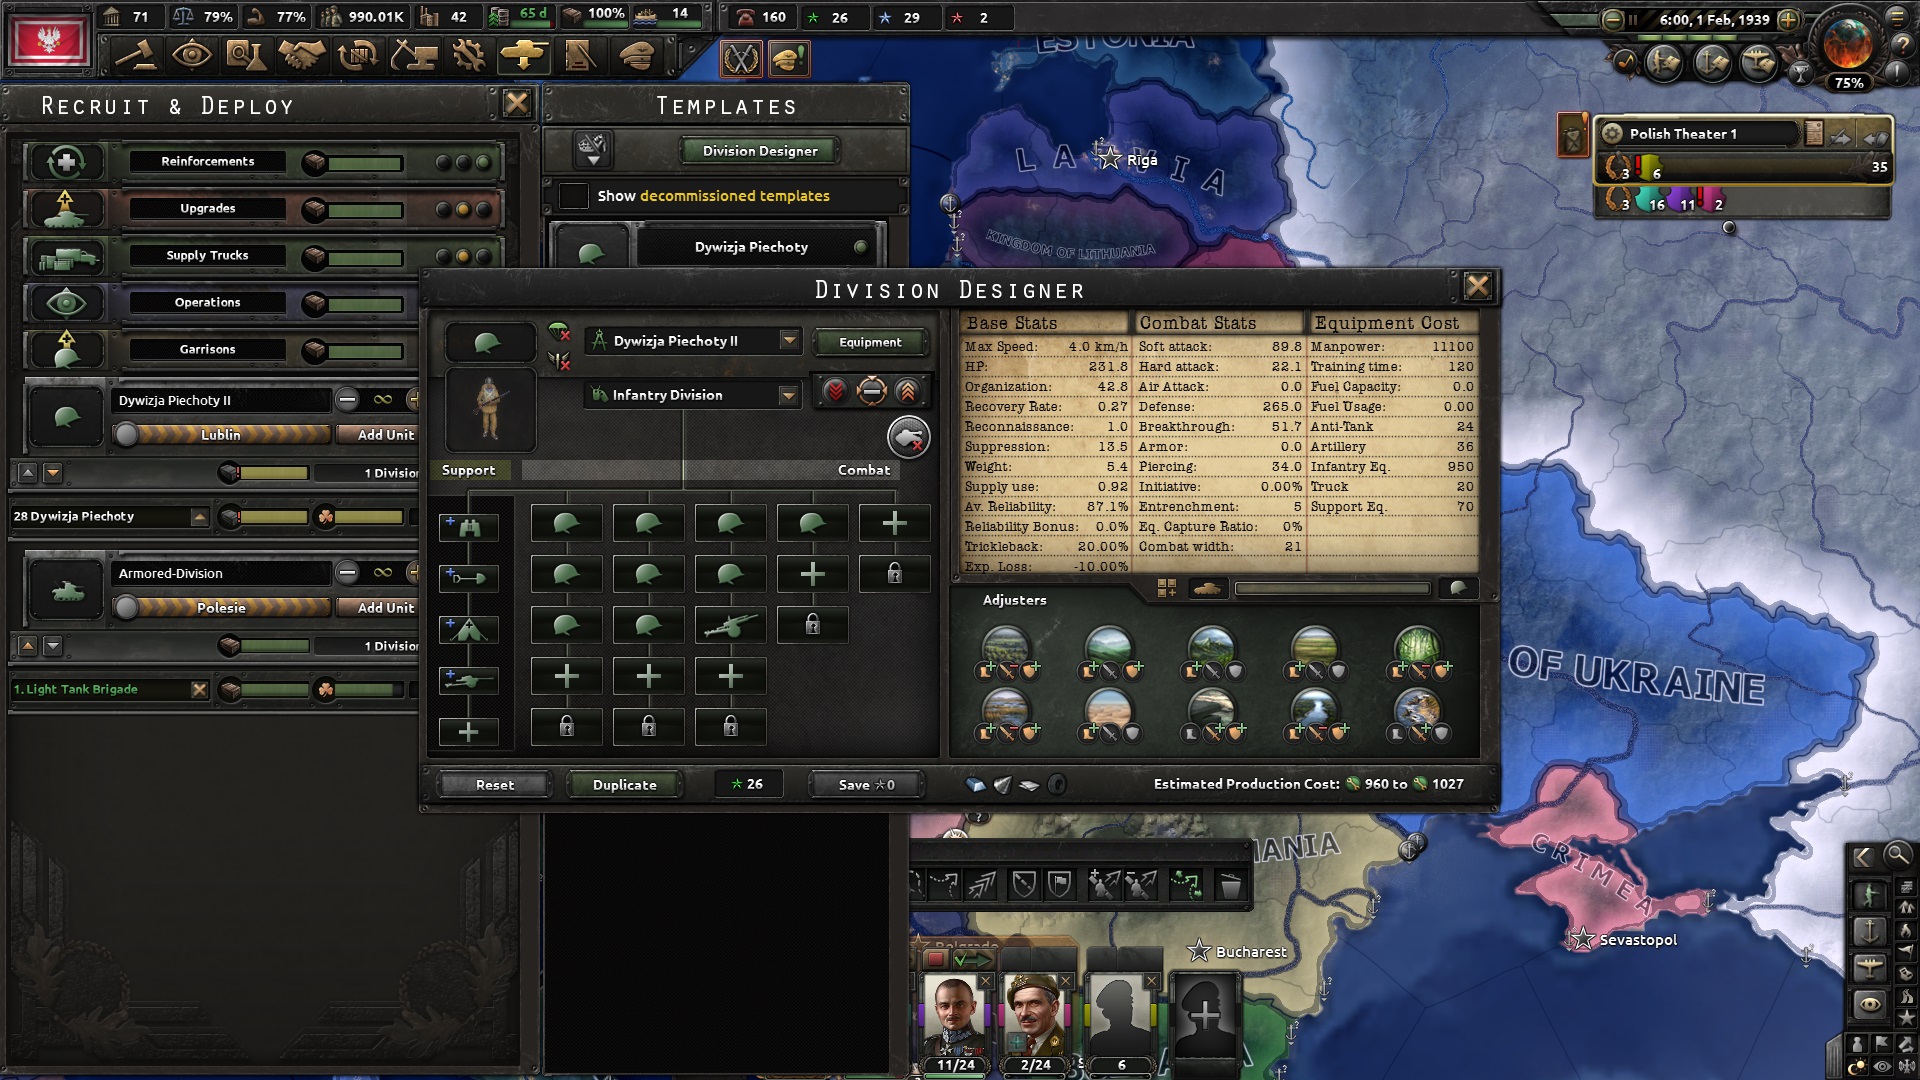 Hearts of Iron 4 meta combat width, division templates, and more